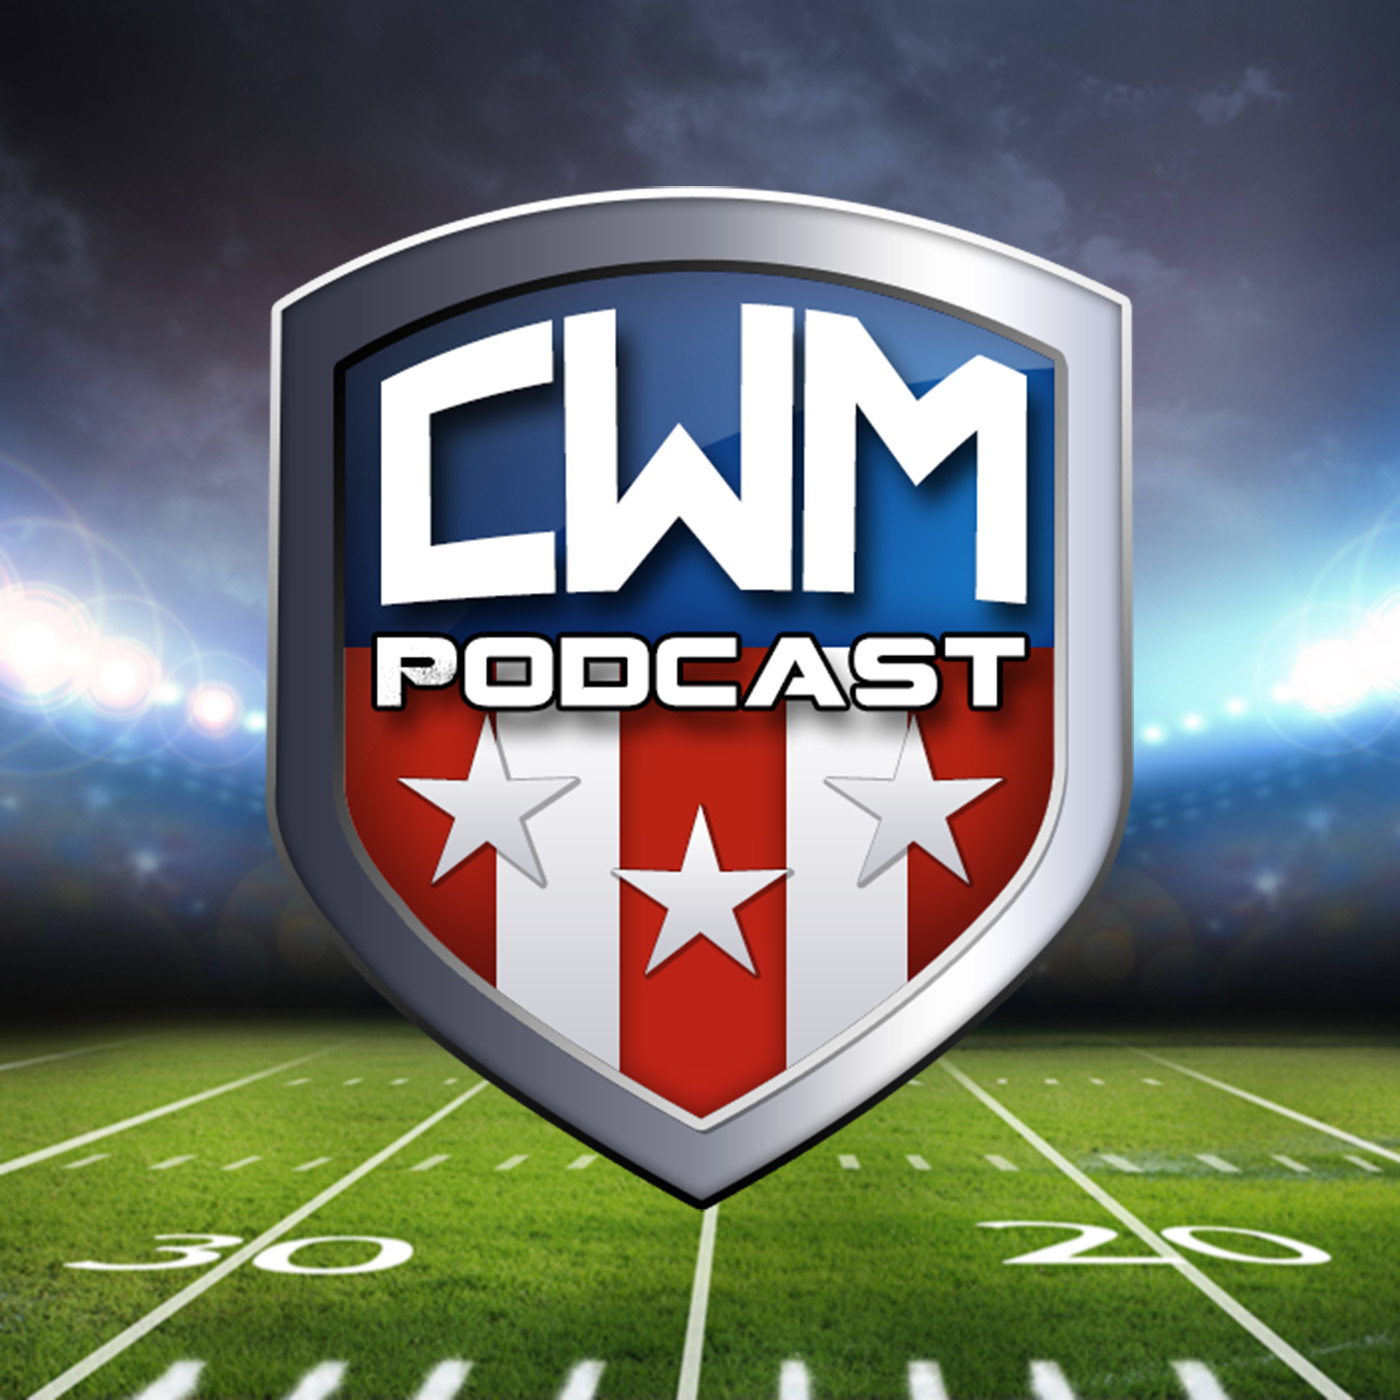 Franchise Tags and the NFL Combine jumpstart Draft season - CWM013